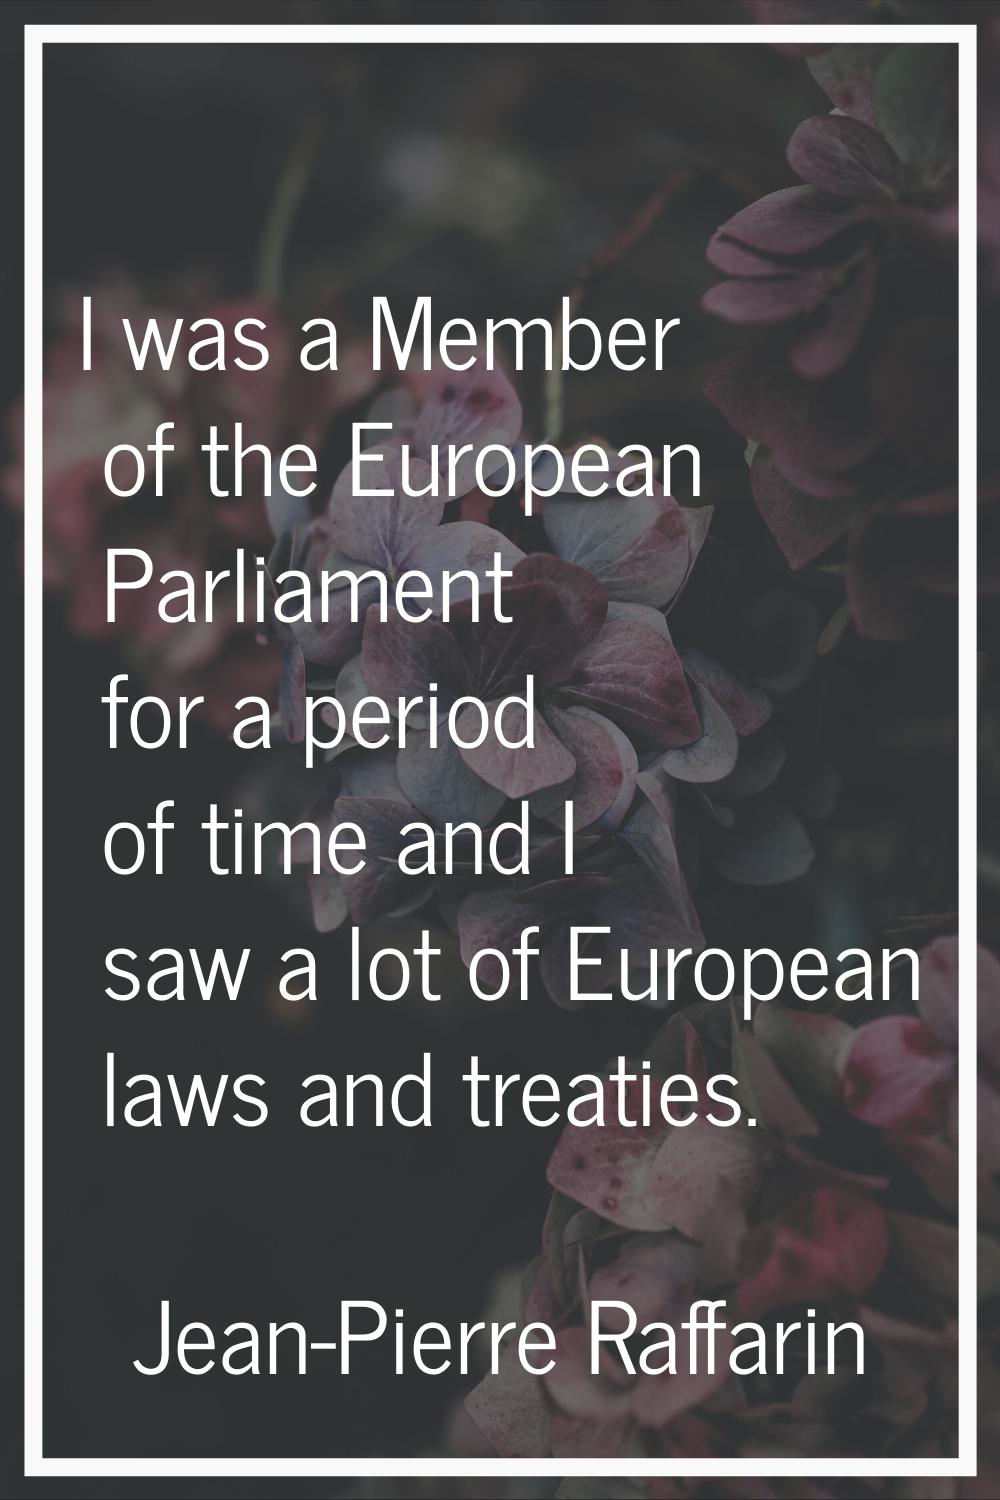 I was a Member of the European Parliament for a period of time and I saw a lot of European laws and